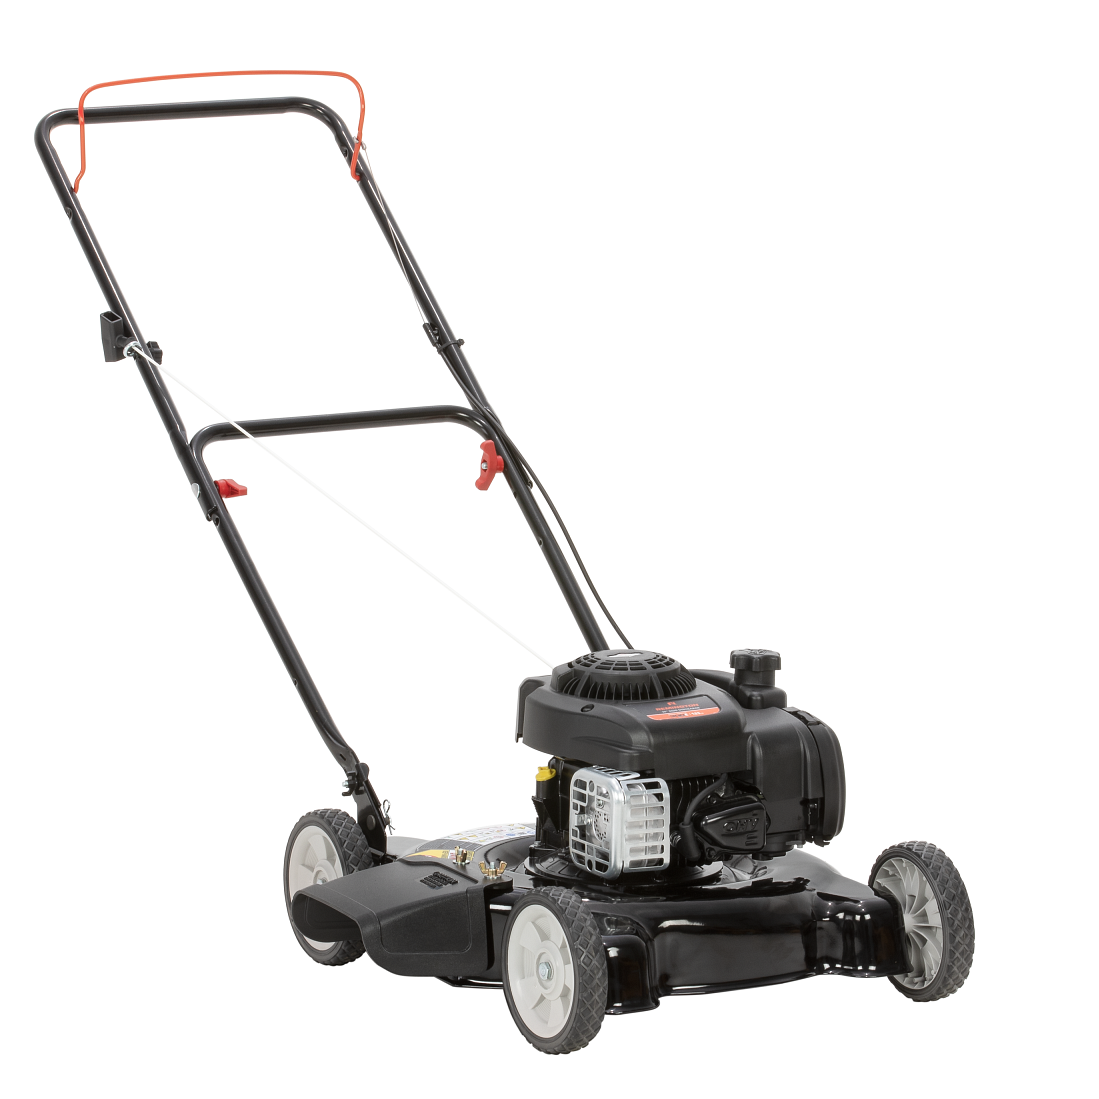 Remington 20" Push Lawn Mower with 125cc Briggs & Stratton Gas Powered Engine - image 2 of 8